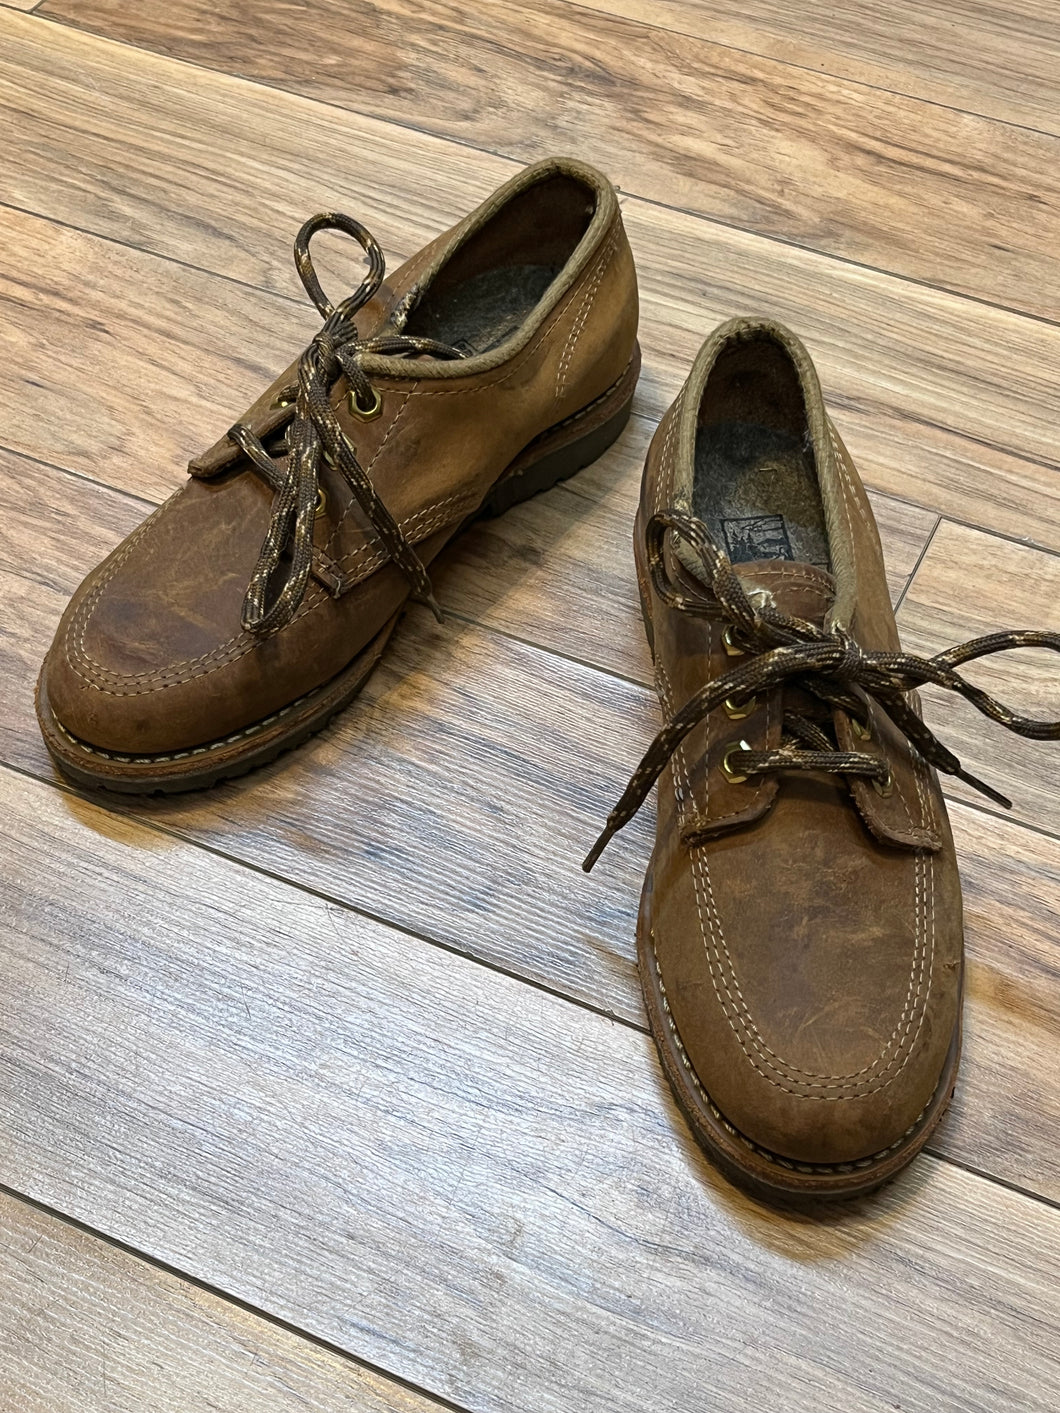 Vintage Prospector 1980’s NWOT deadstock moc toe three eyelet brown leather shoes, Made in Canada

Size US 8 womens